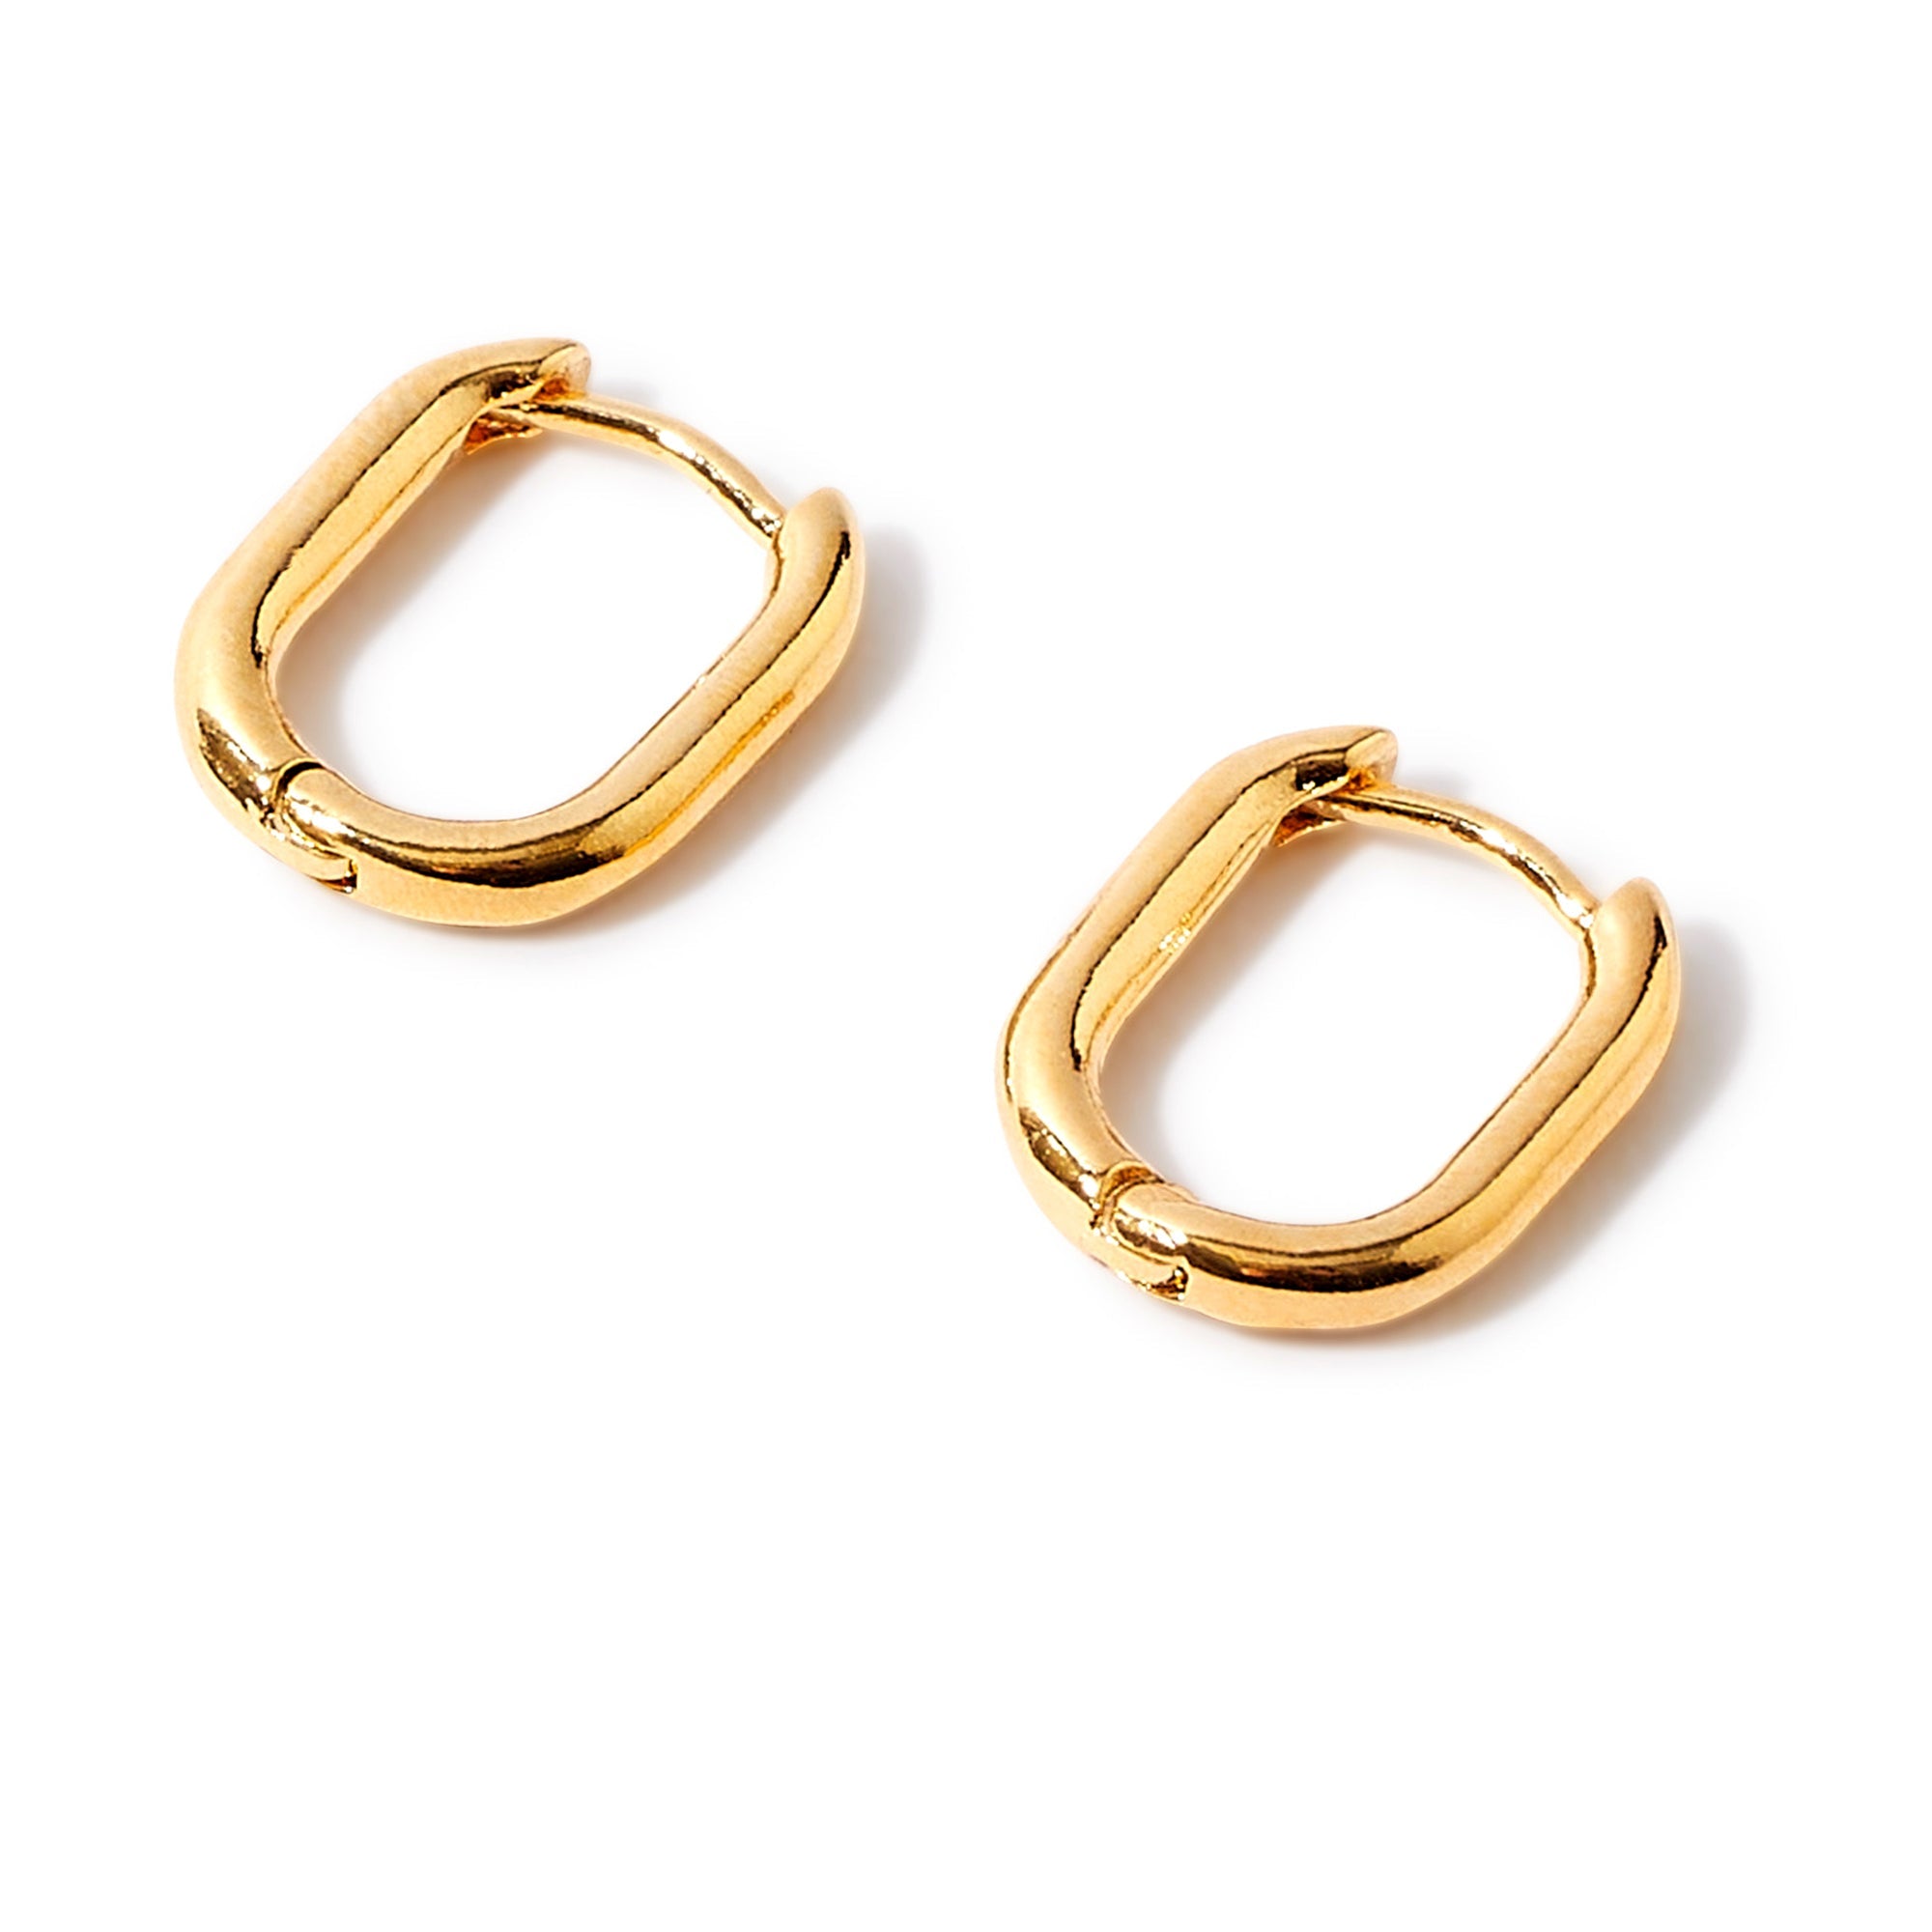 Real Gold Plated Rectangular Hoop Earring For Women By Accessorize London